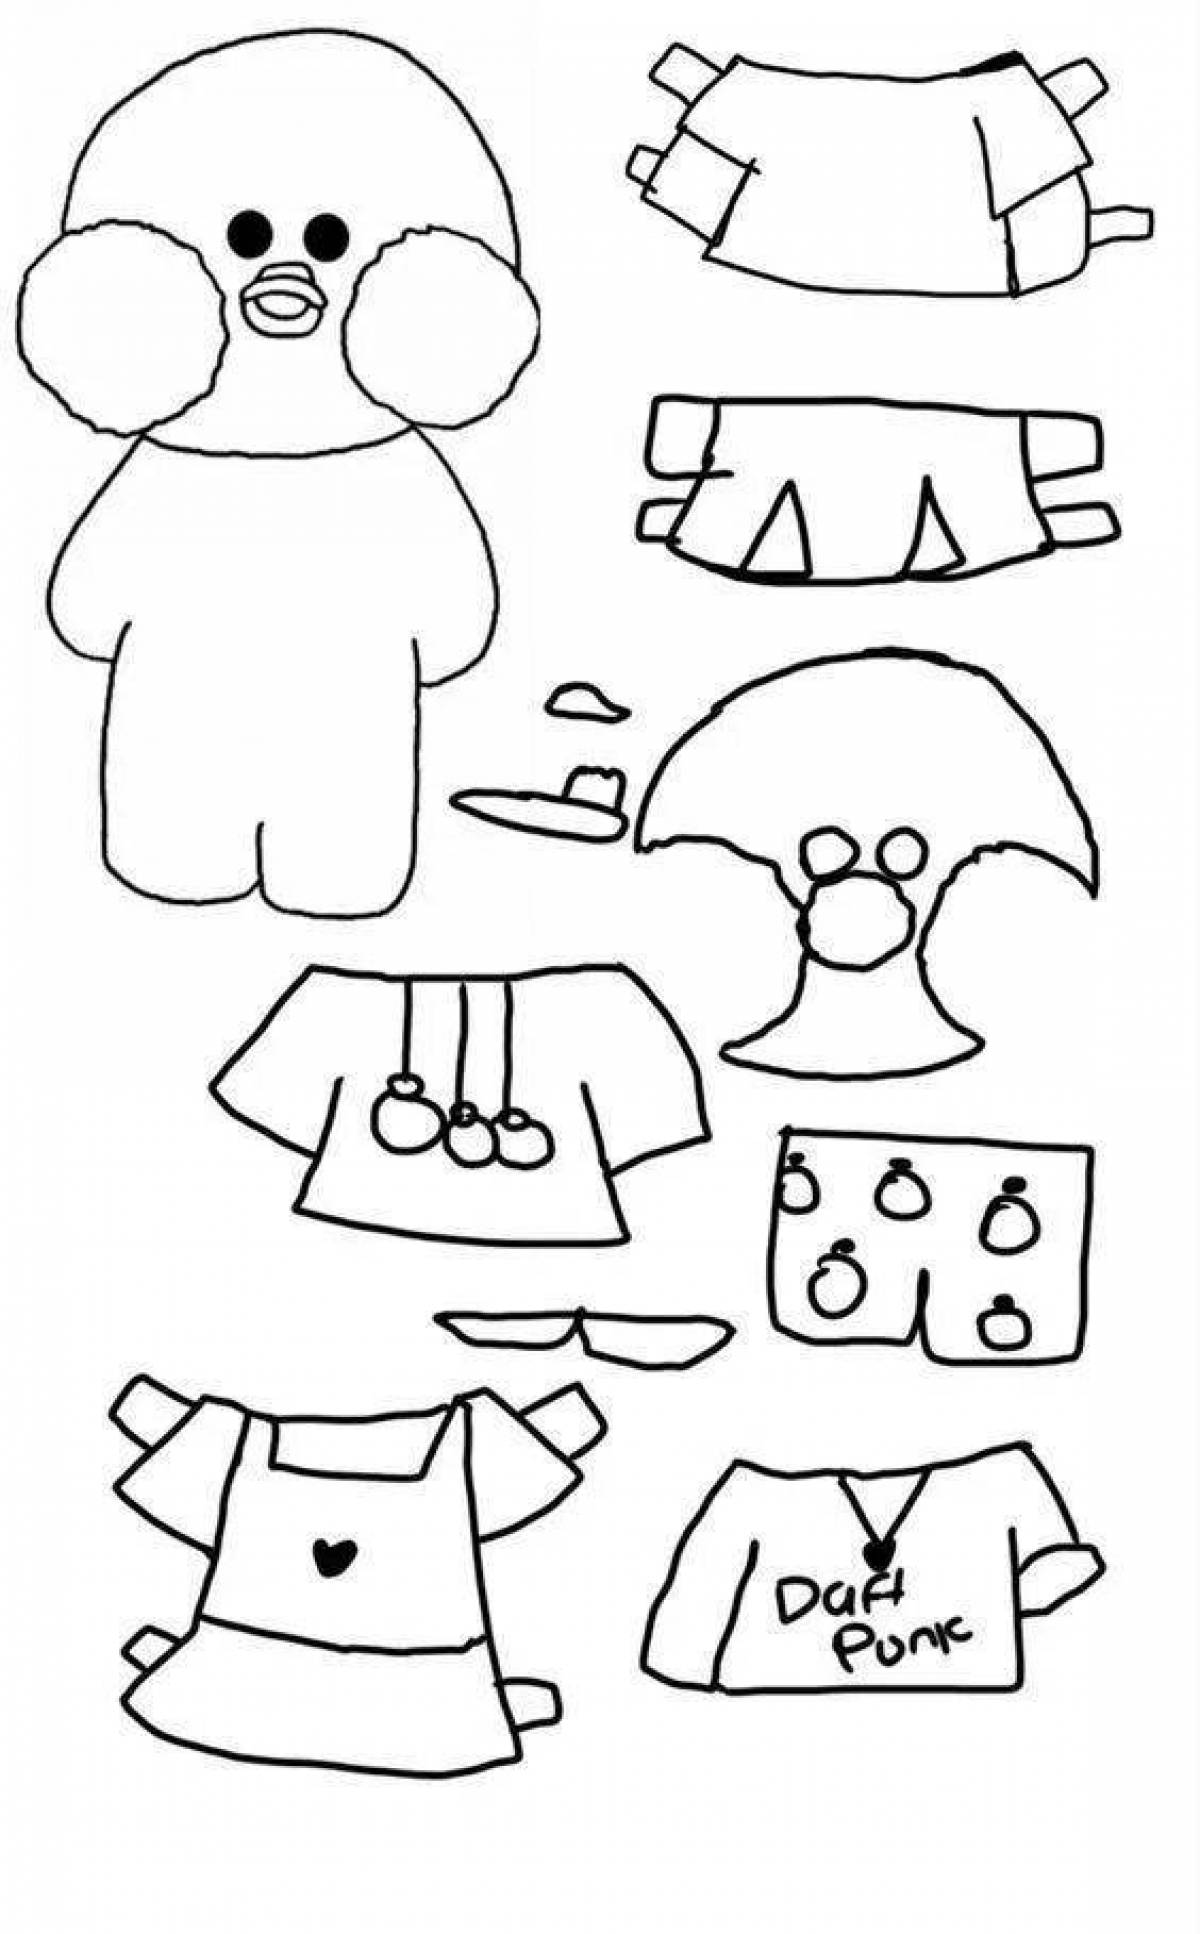 Coloring page of wild duck in clothes